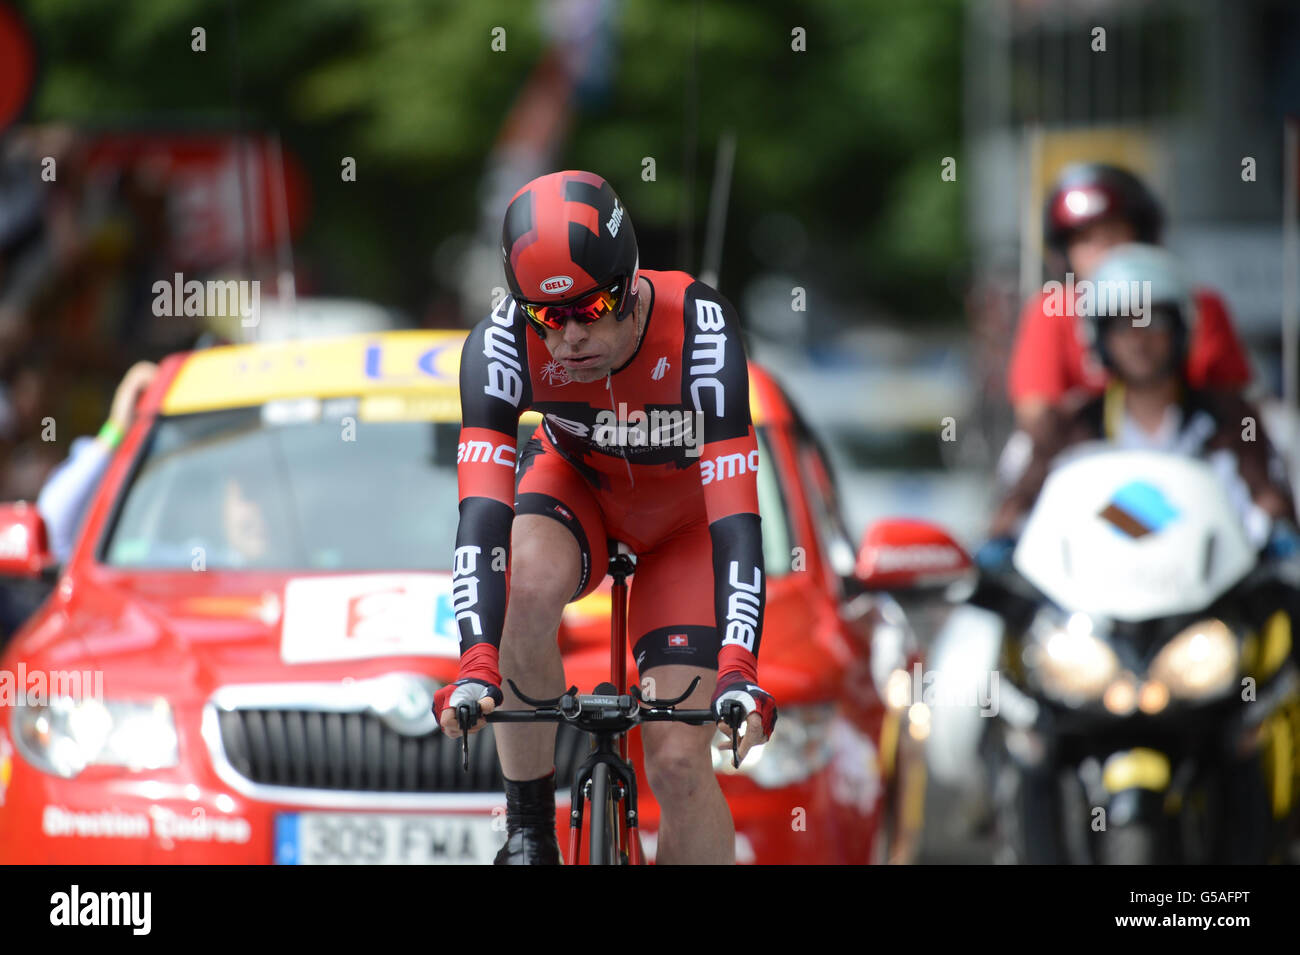 BMC's Cadel Evans crosses the finish line during the Prologue Stage of the 2012 Tour de France in Liege, Belgium. Stock Photo